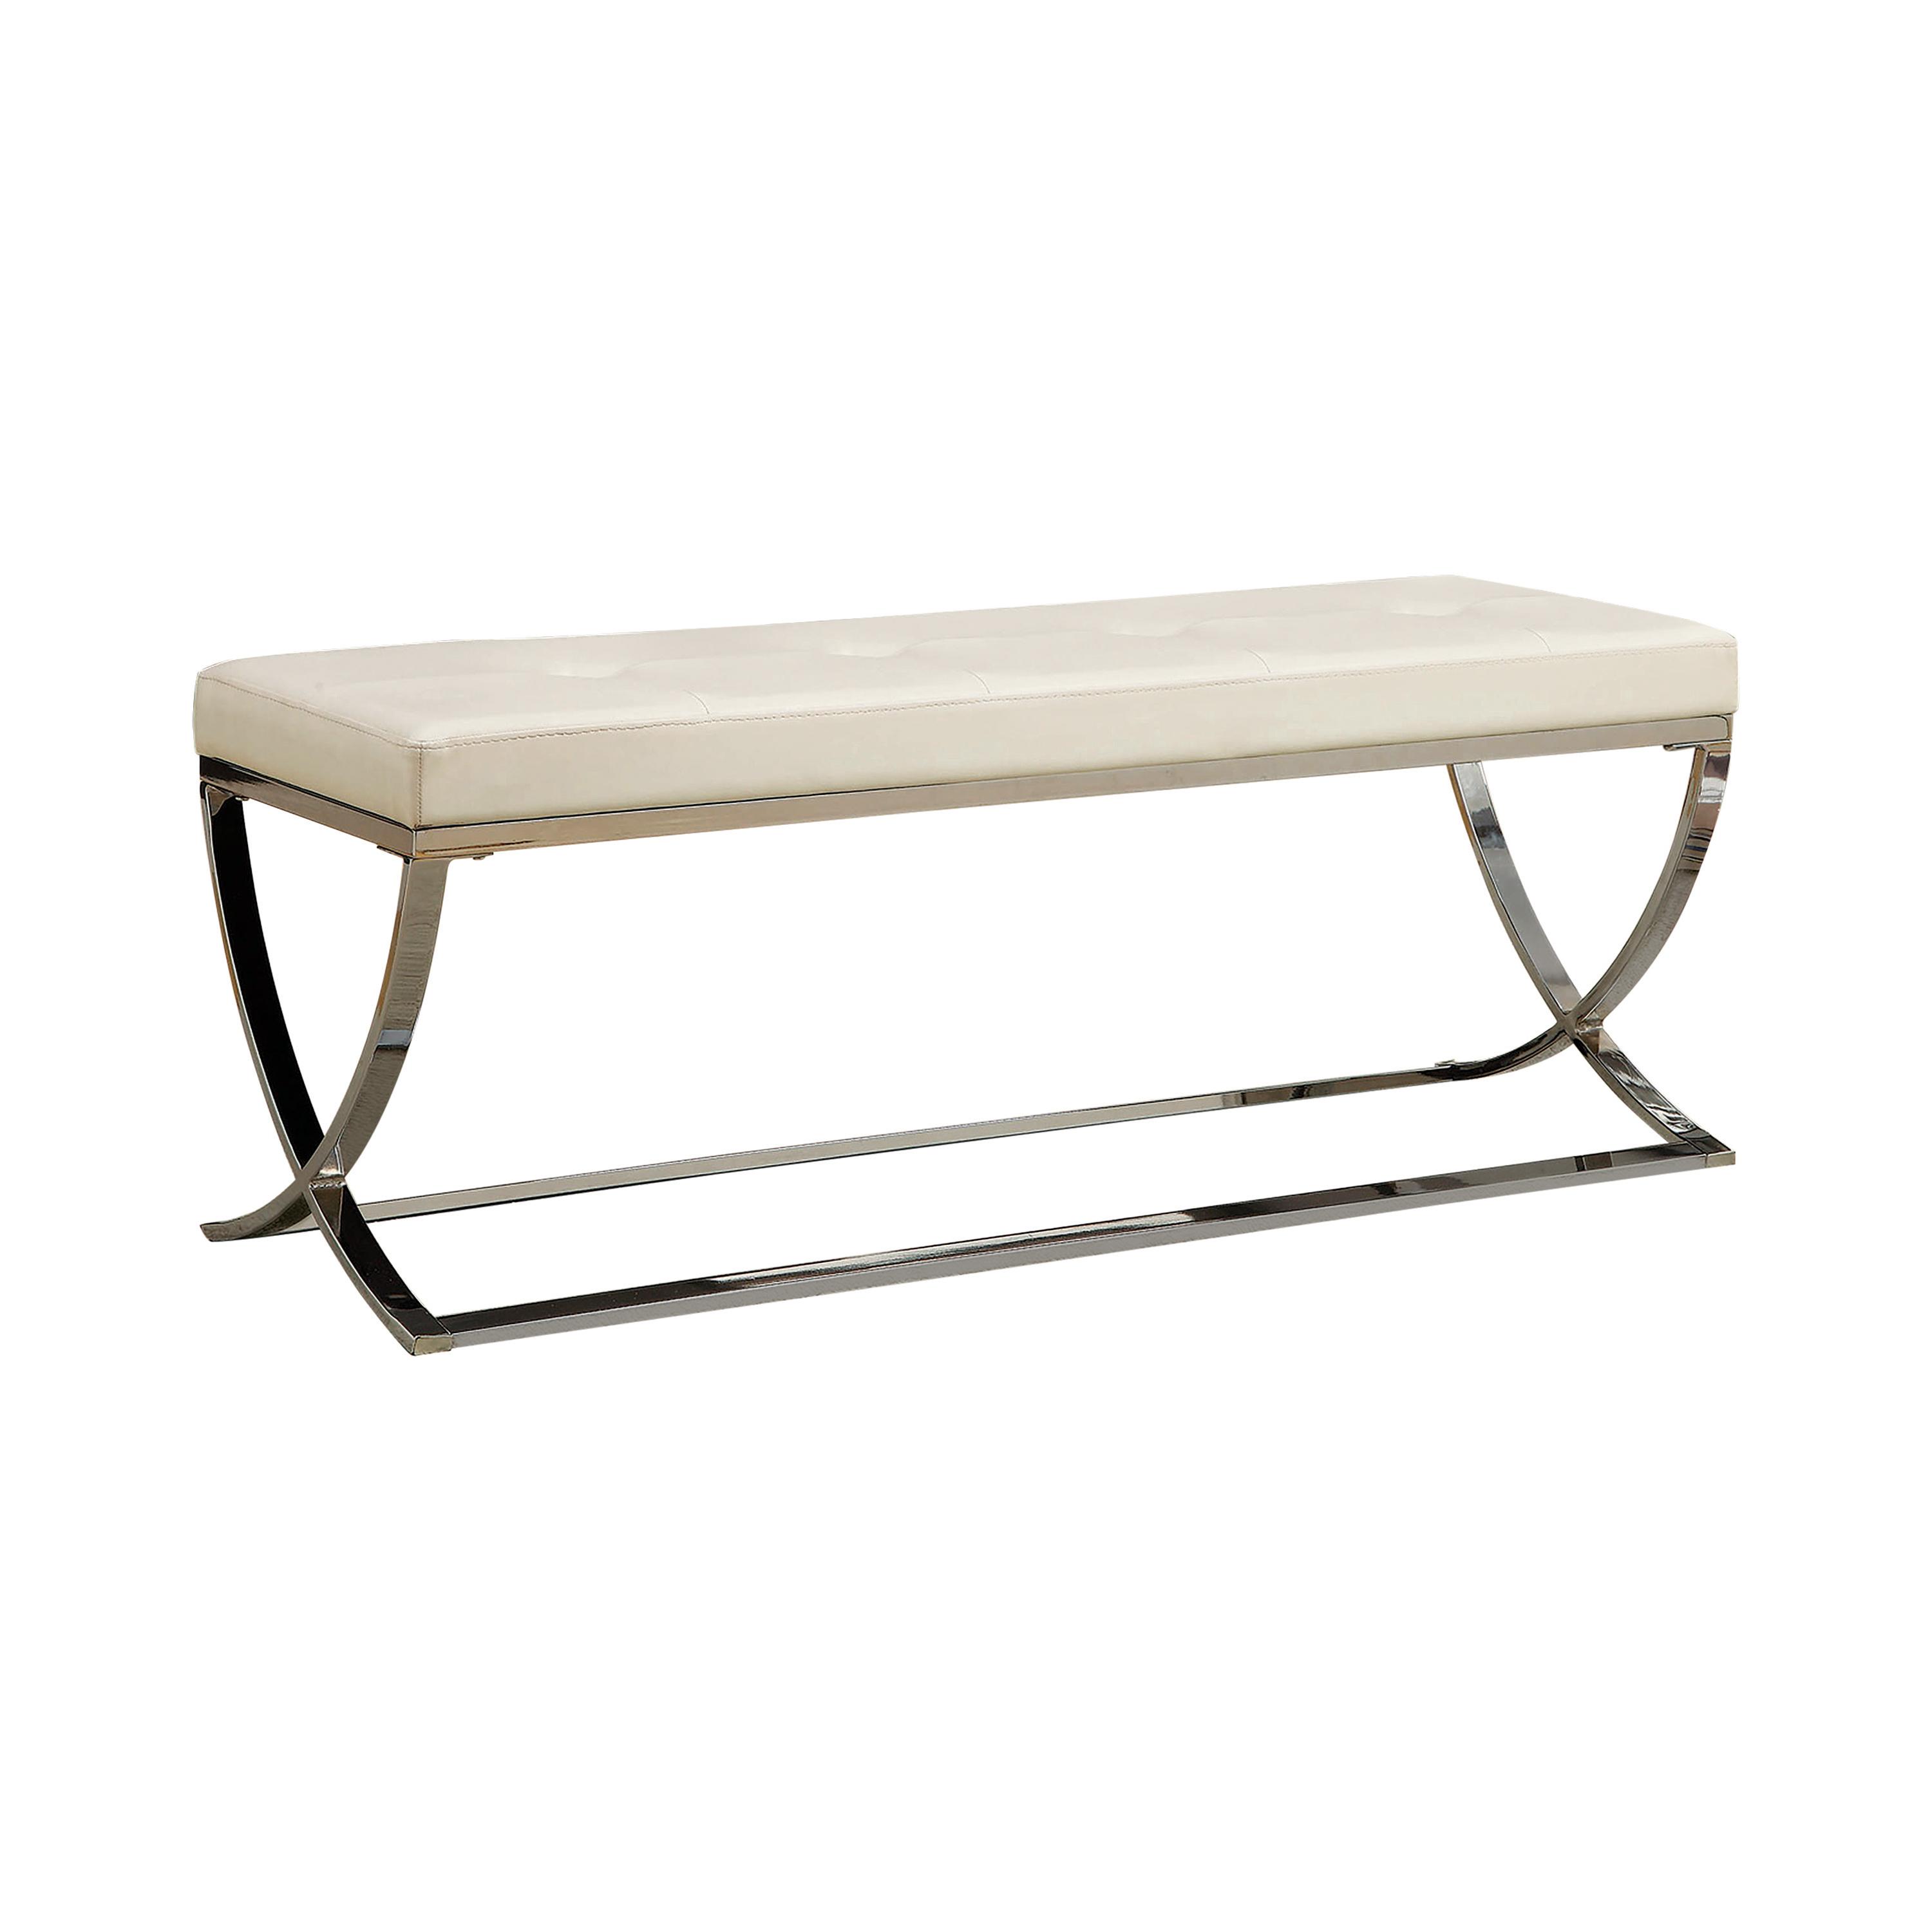 Contemporary Bench 501157 501157 in White Leatherette